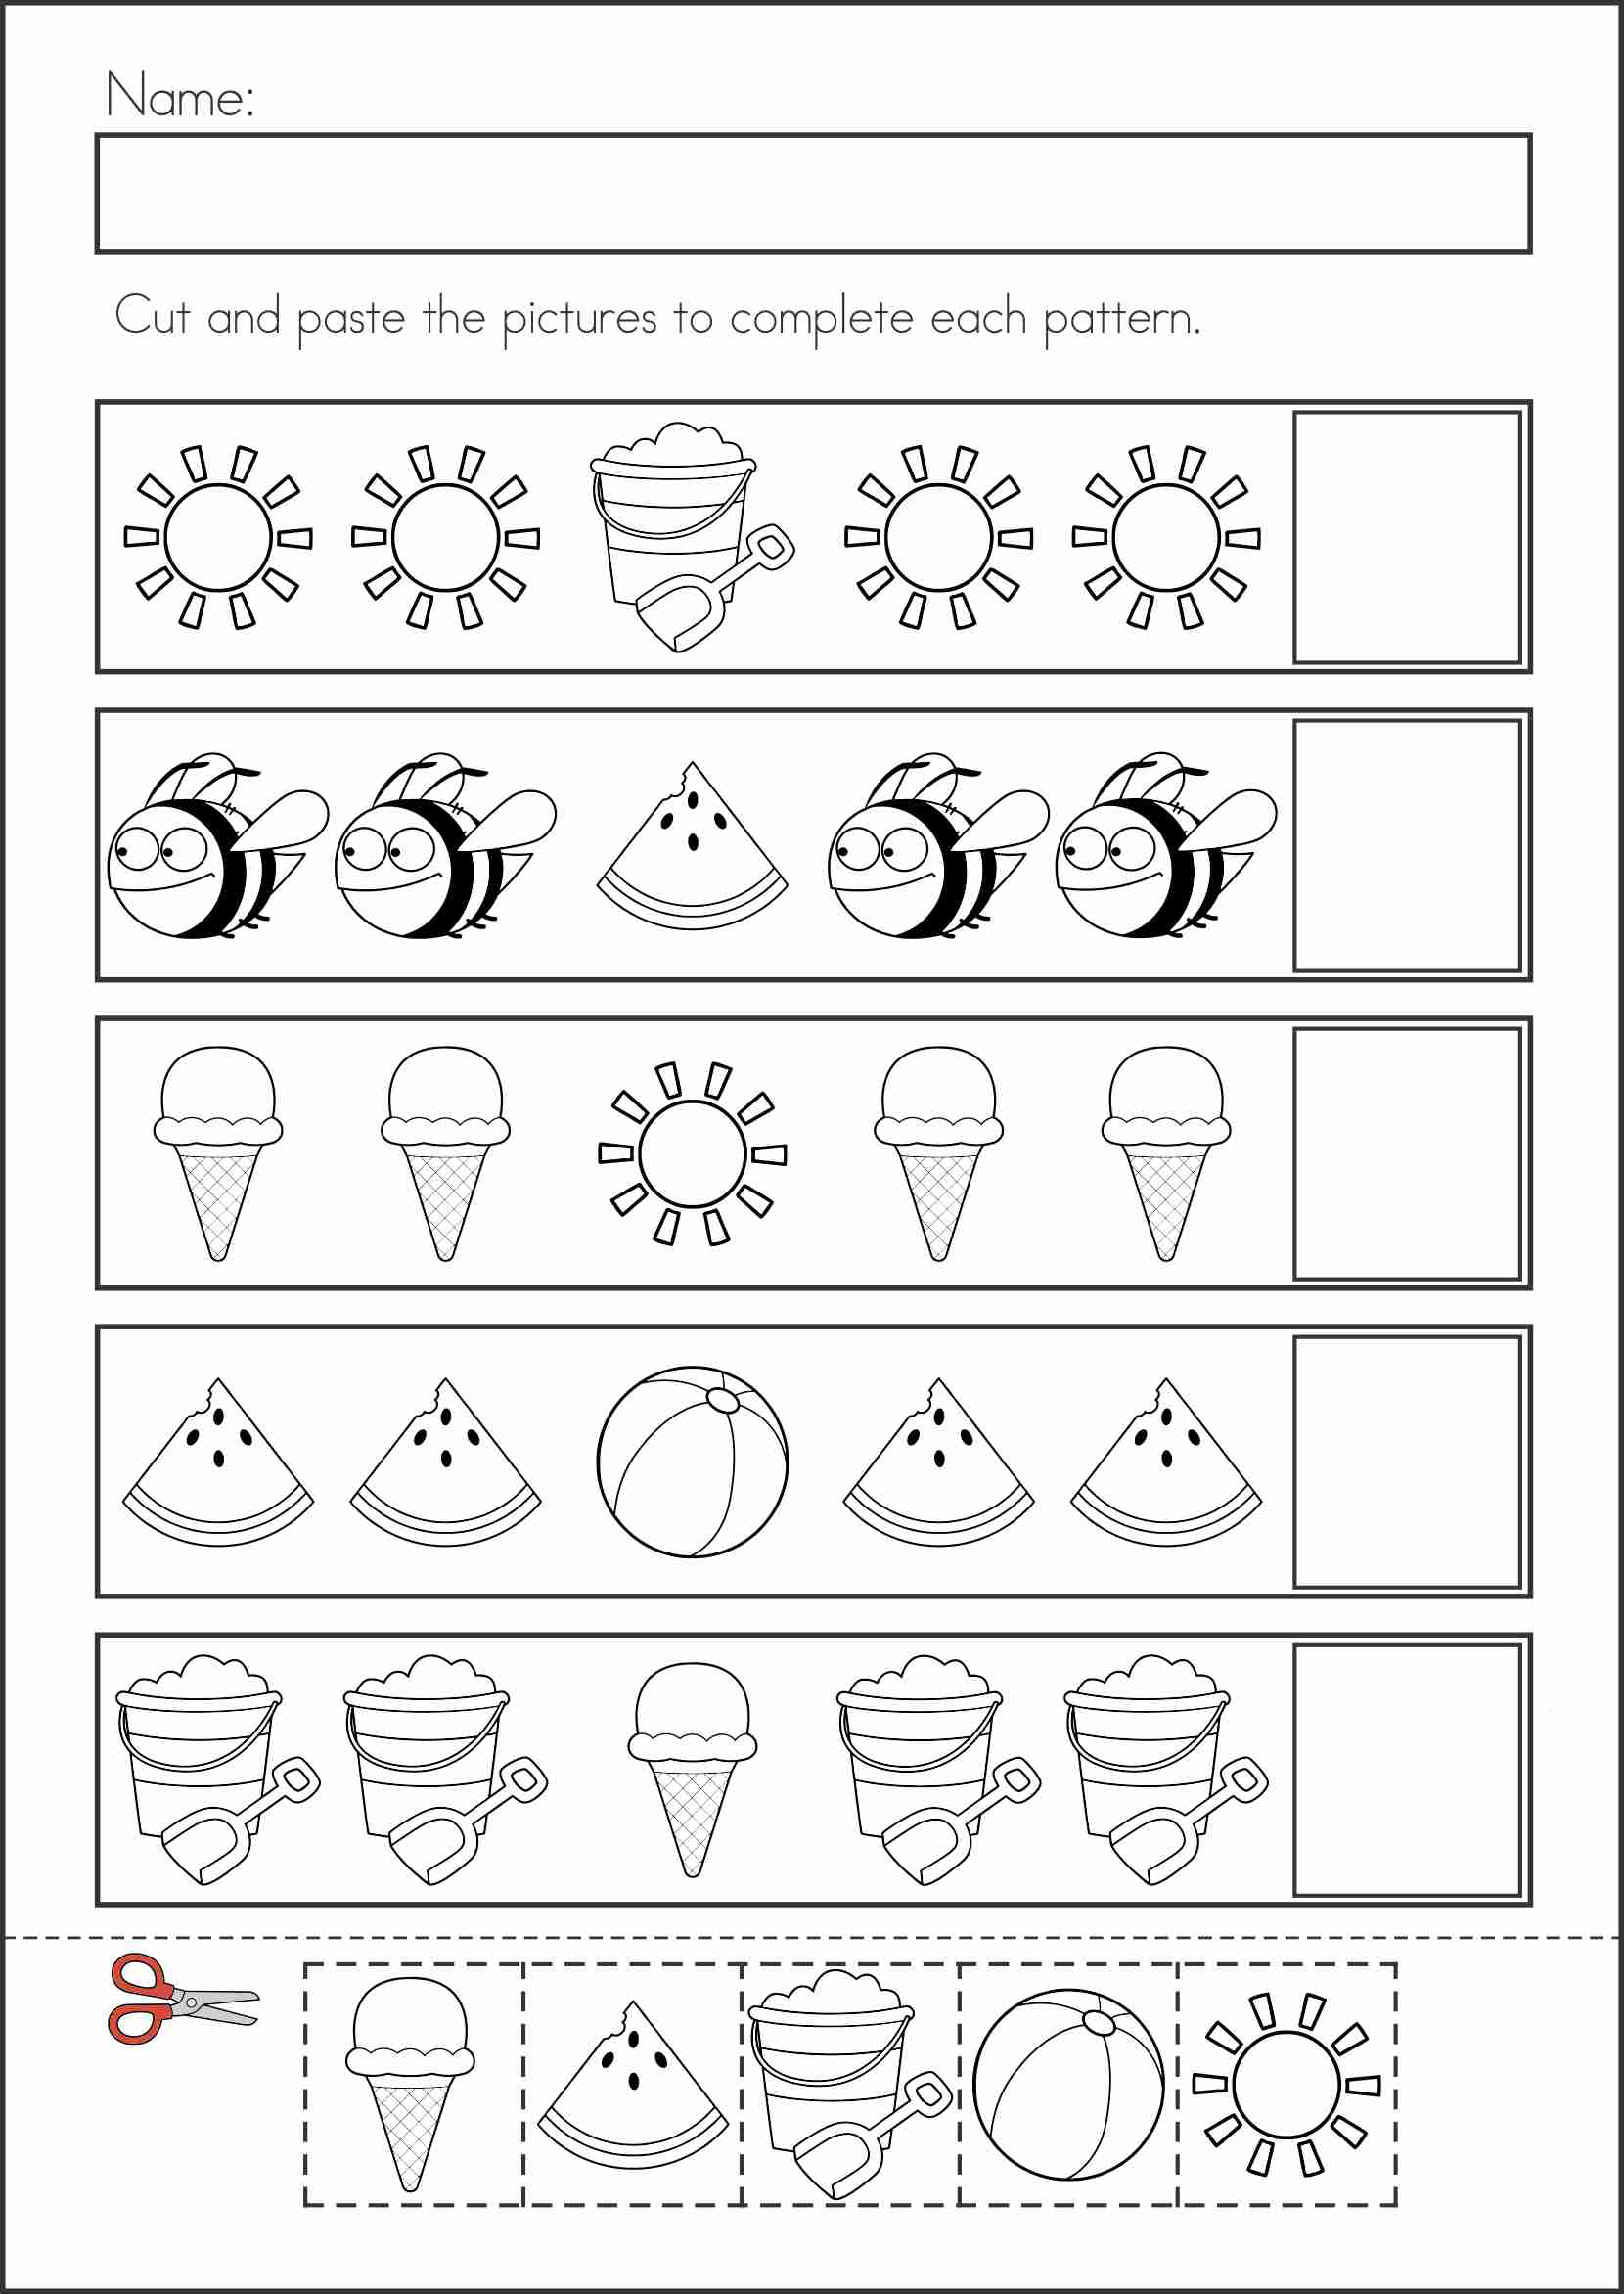 free-printable-cut-and-paste-pattern-worksheets-printable-templates